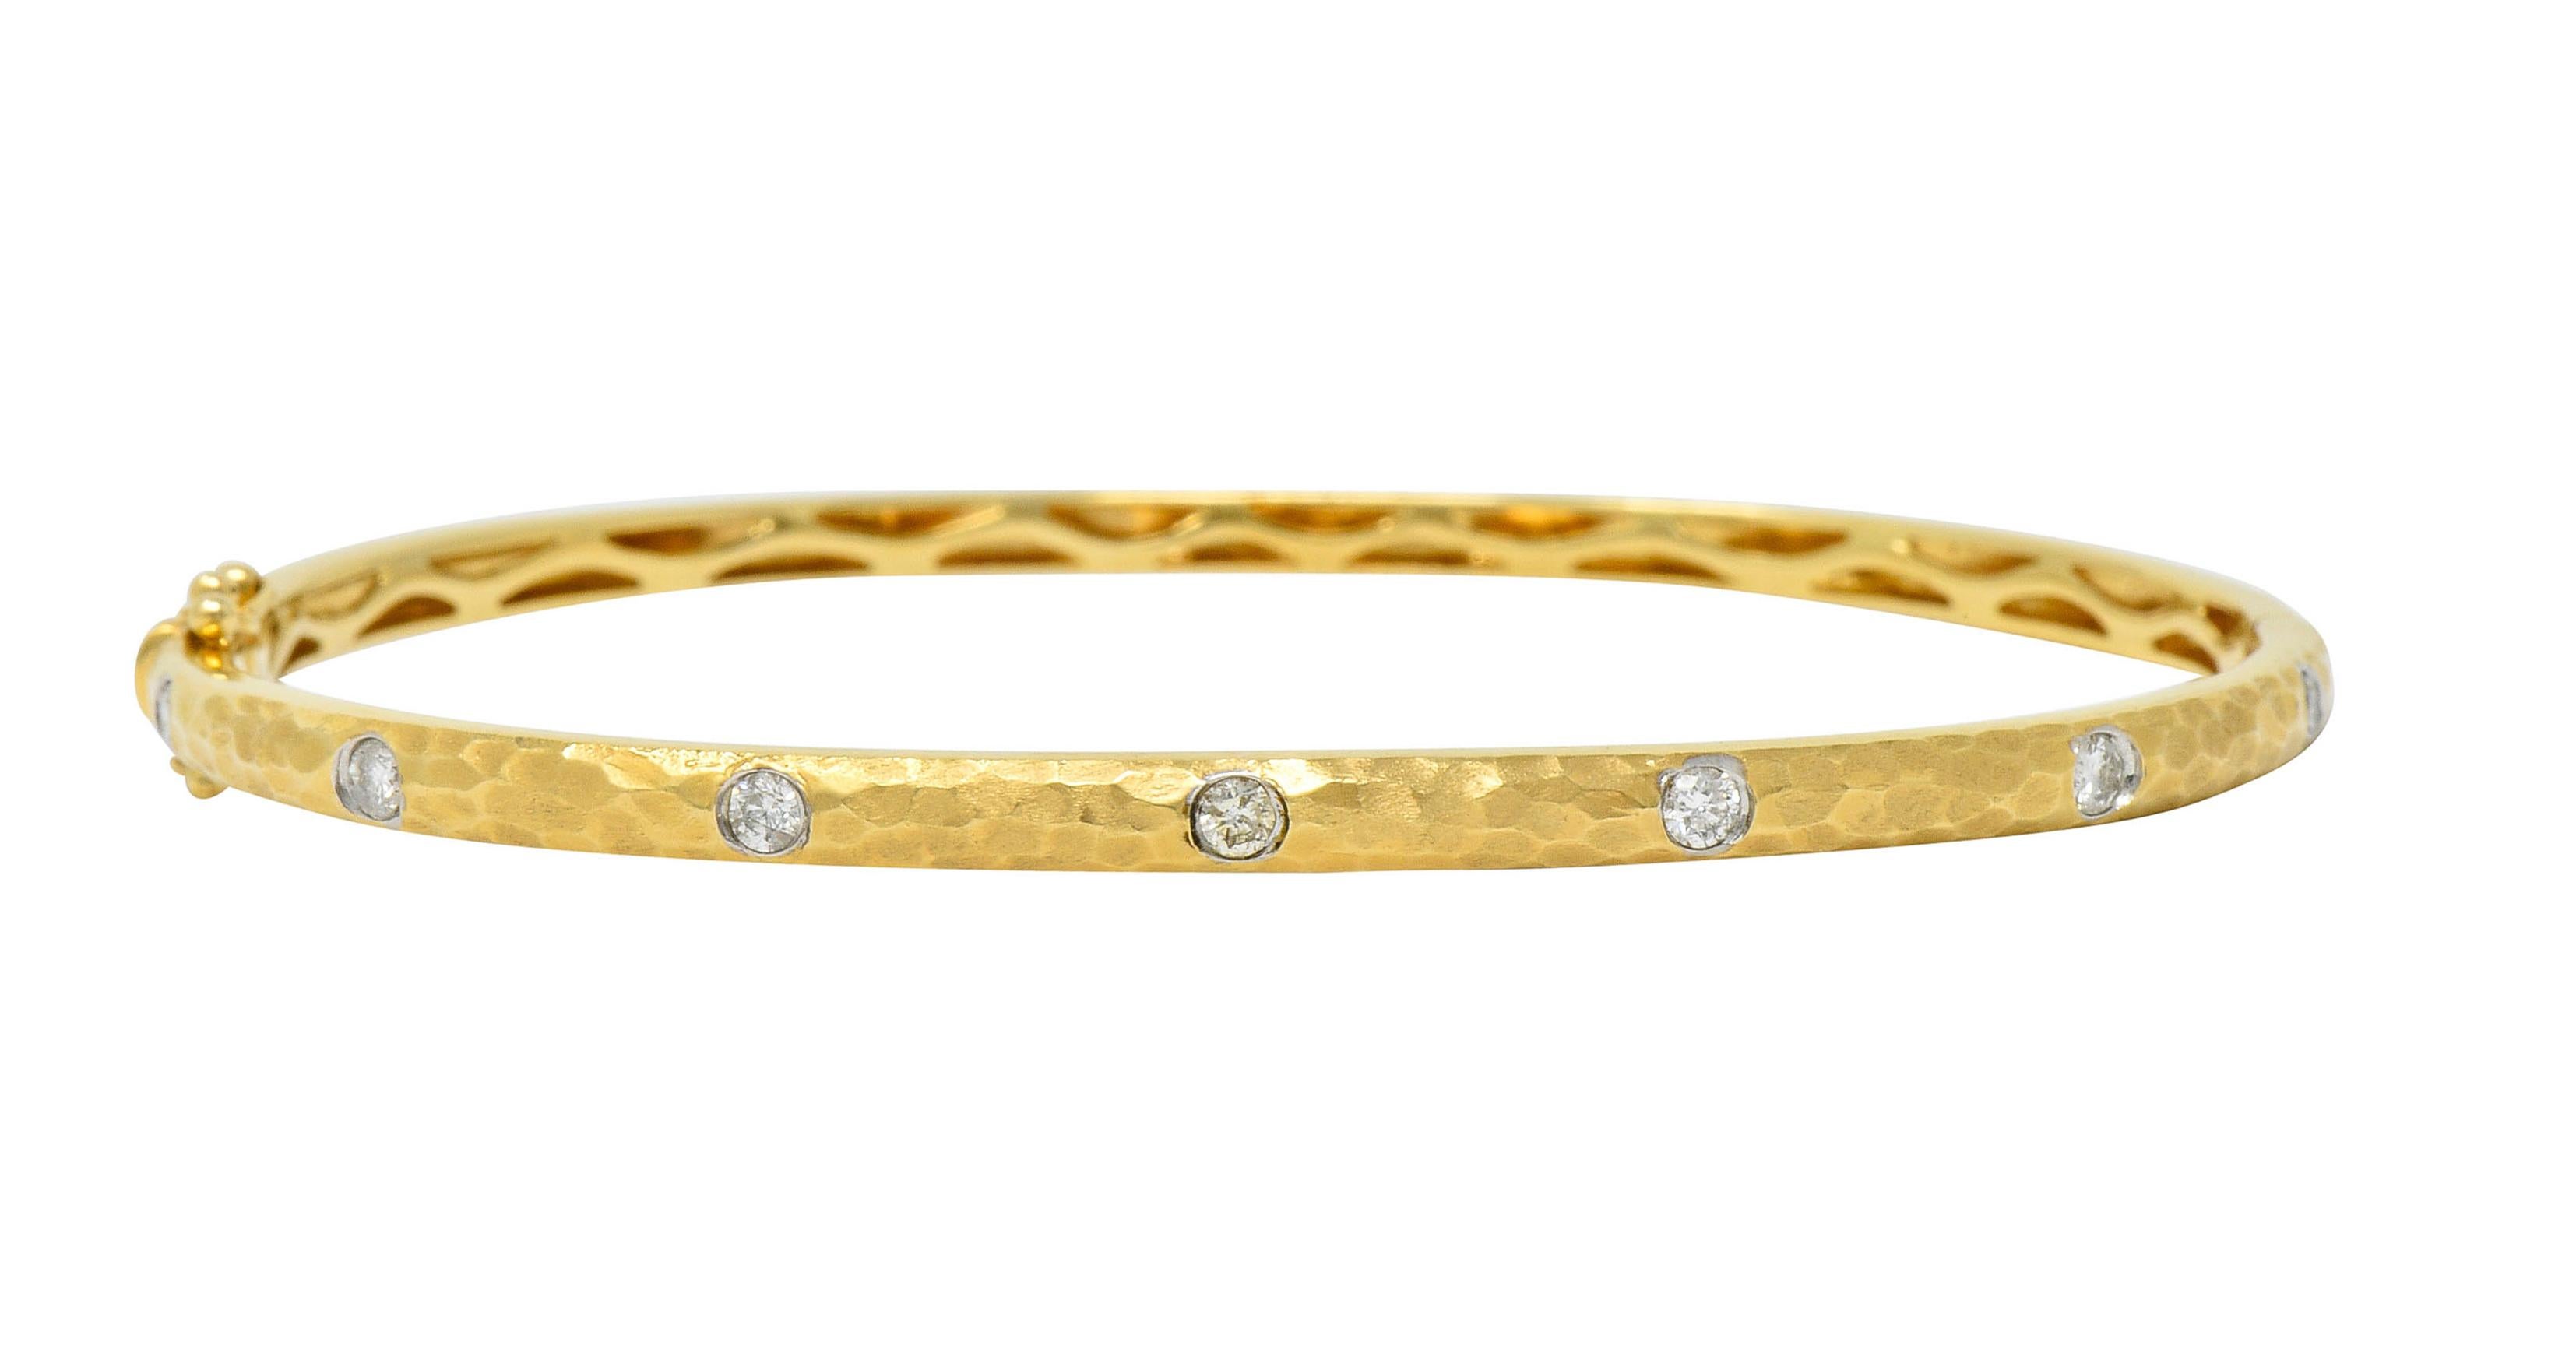 Hinged bangle bracelet with a strongly hammered and matte gold finish

Flush set to front, in white gold, by seven round brilliant cut diamonds

Weighing in total approximately 0.42 carat with H/I color and SI clarity

Completed by a concealed clasp